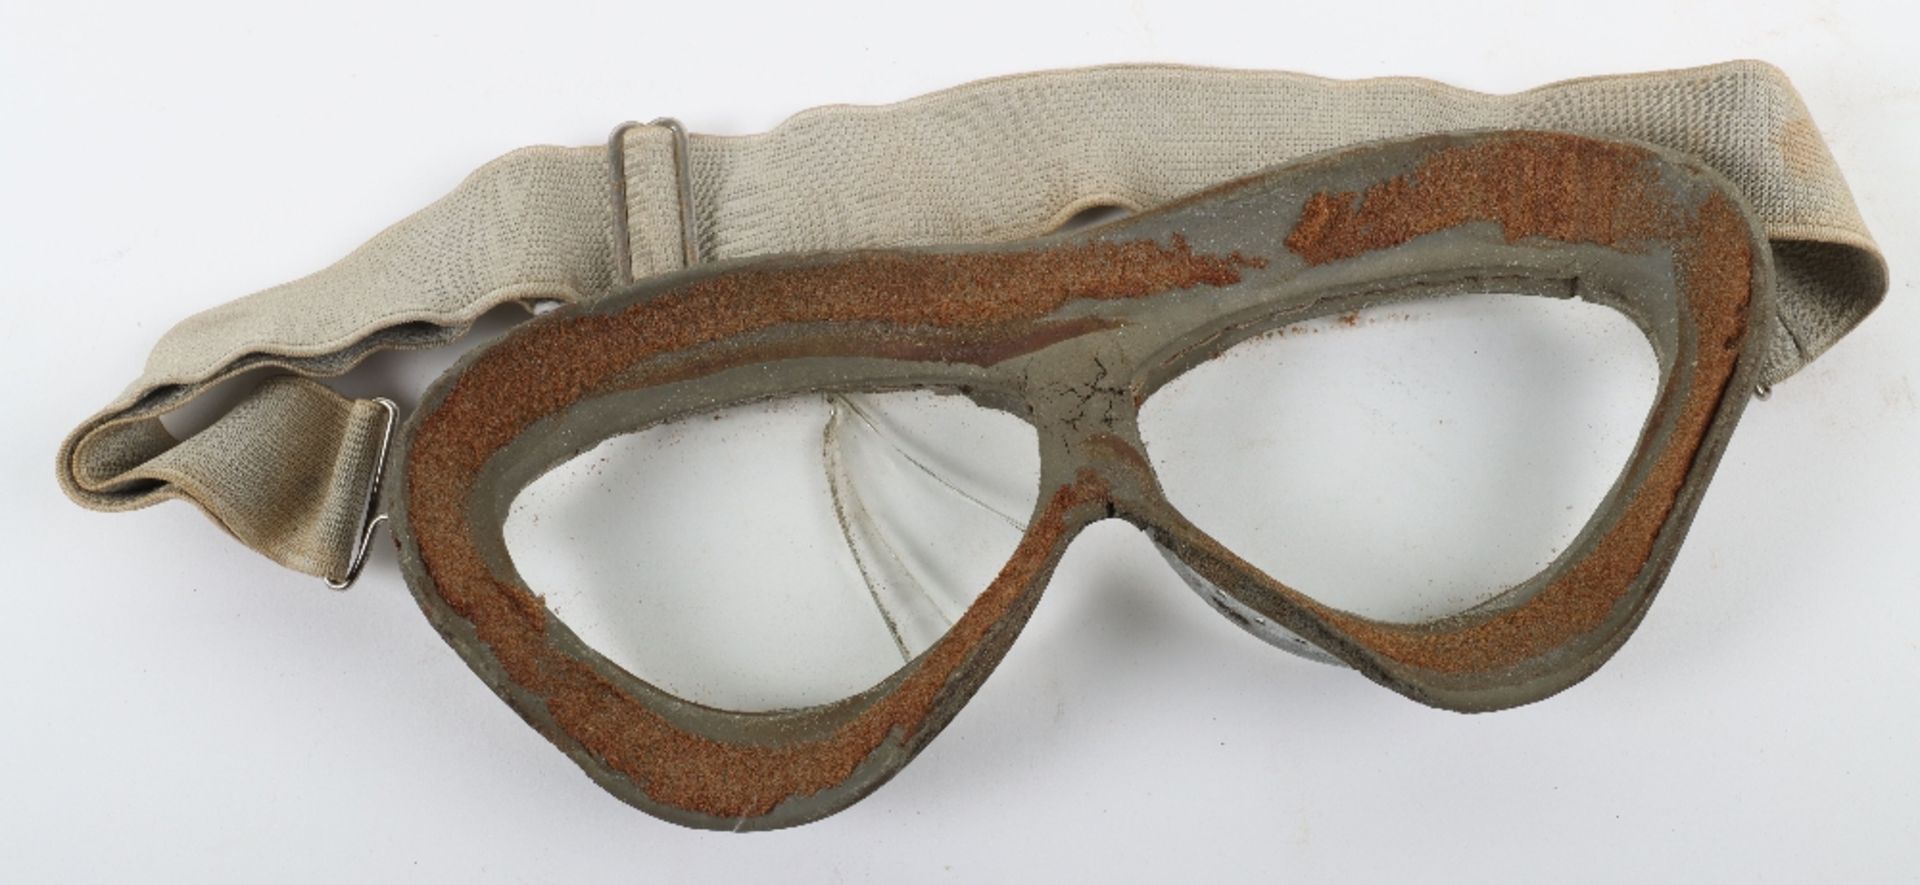 WW2 German Luftwaffe Flying Helmets and Goggles Attributed to Otto Thomsen Flying Instructor of Famo - Bild 11 aus 12